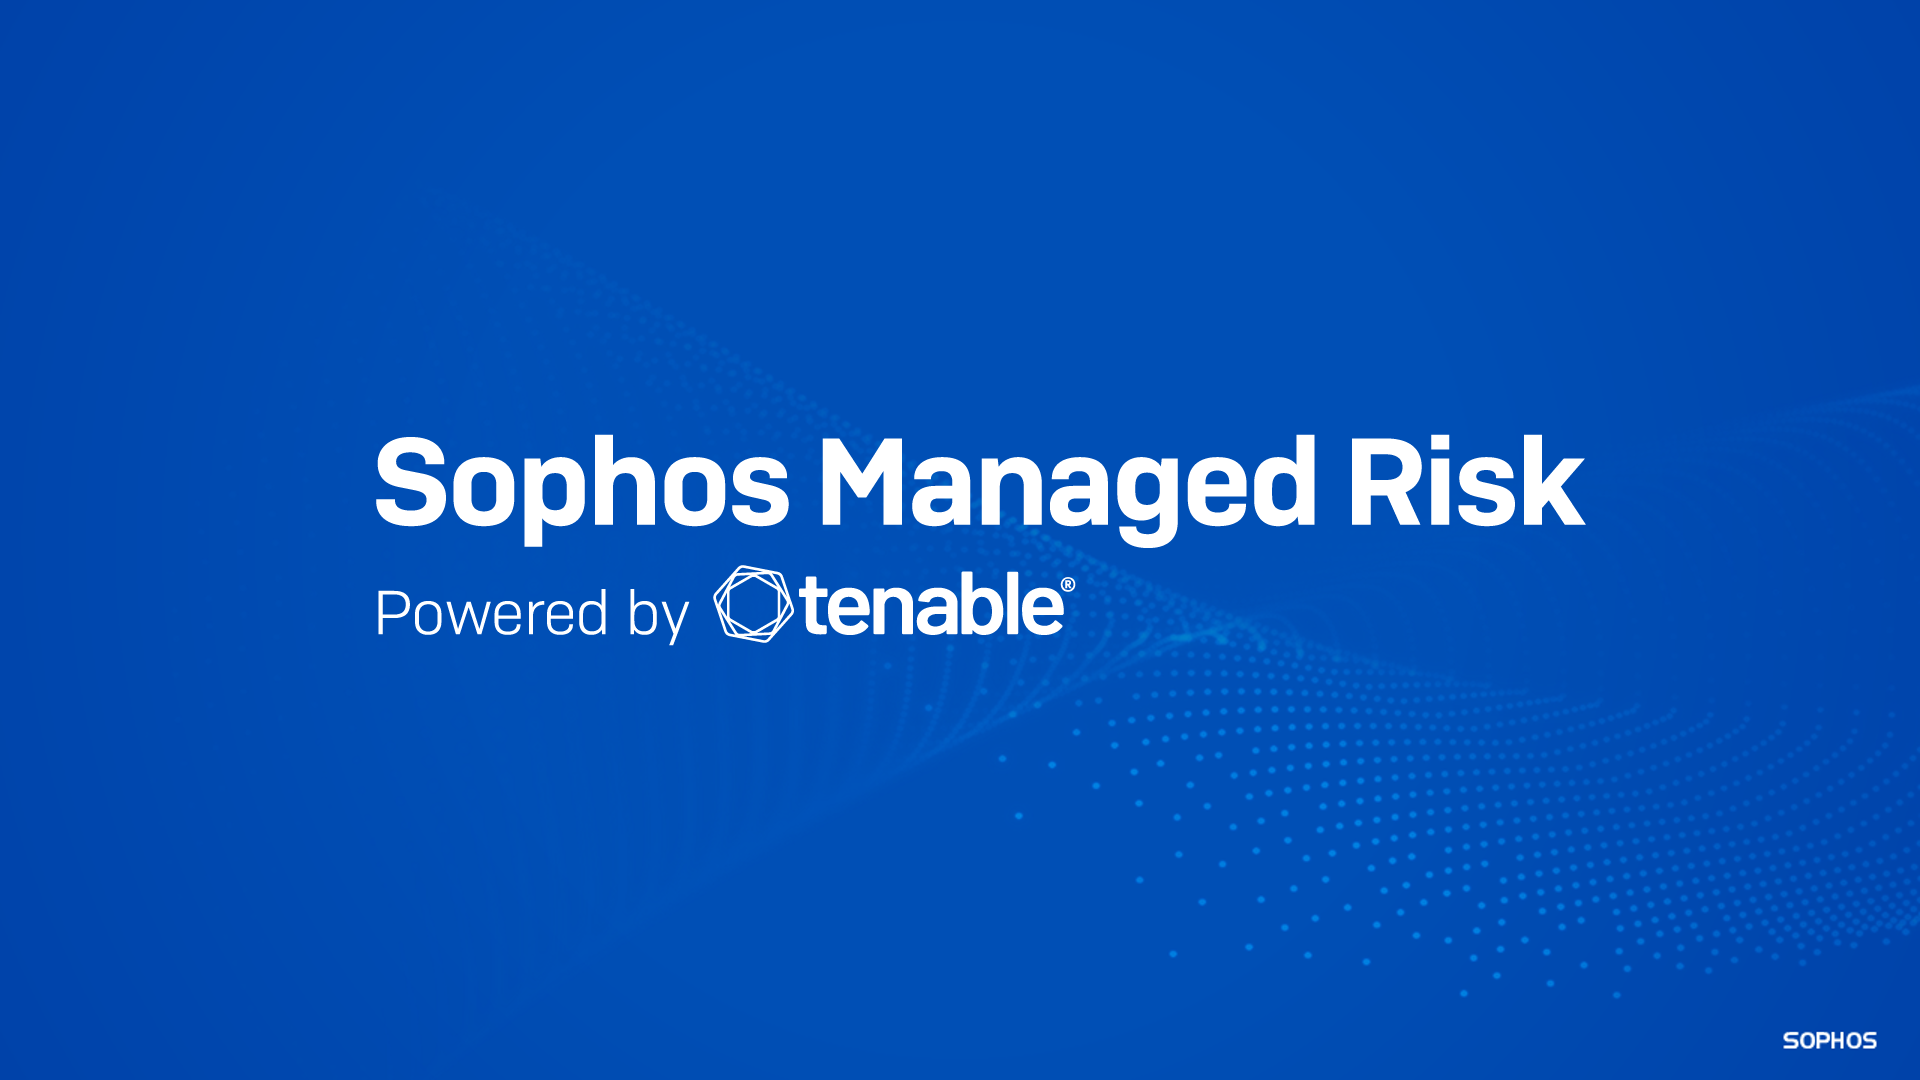 Introducing Sophos Managed Risk, Powered by Tenable